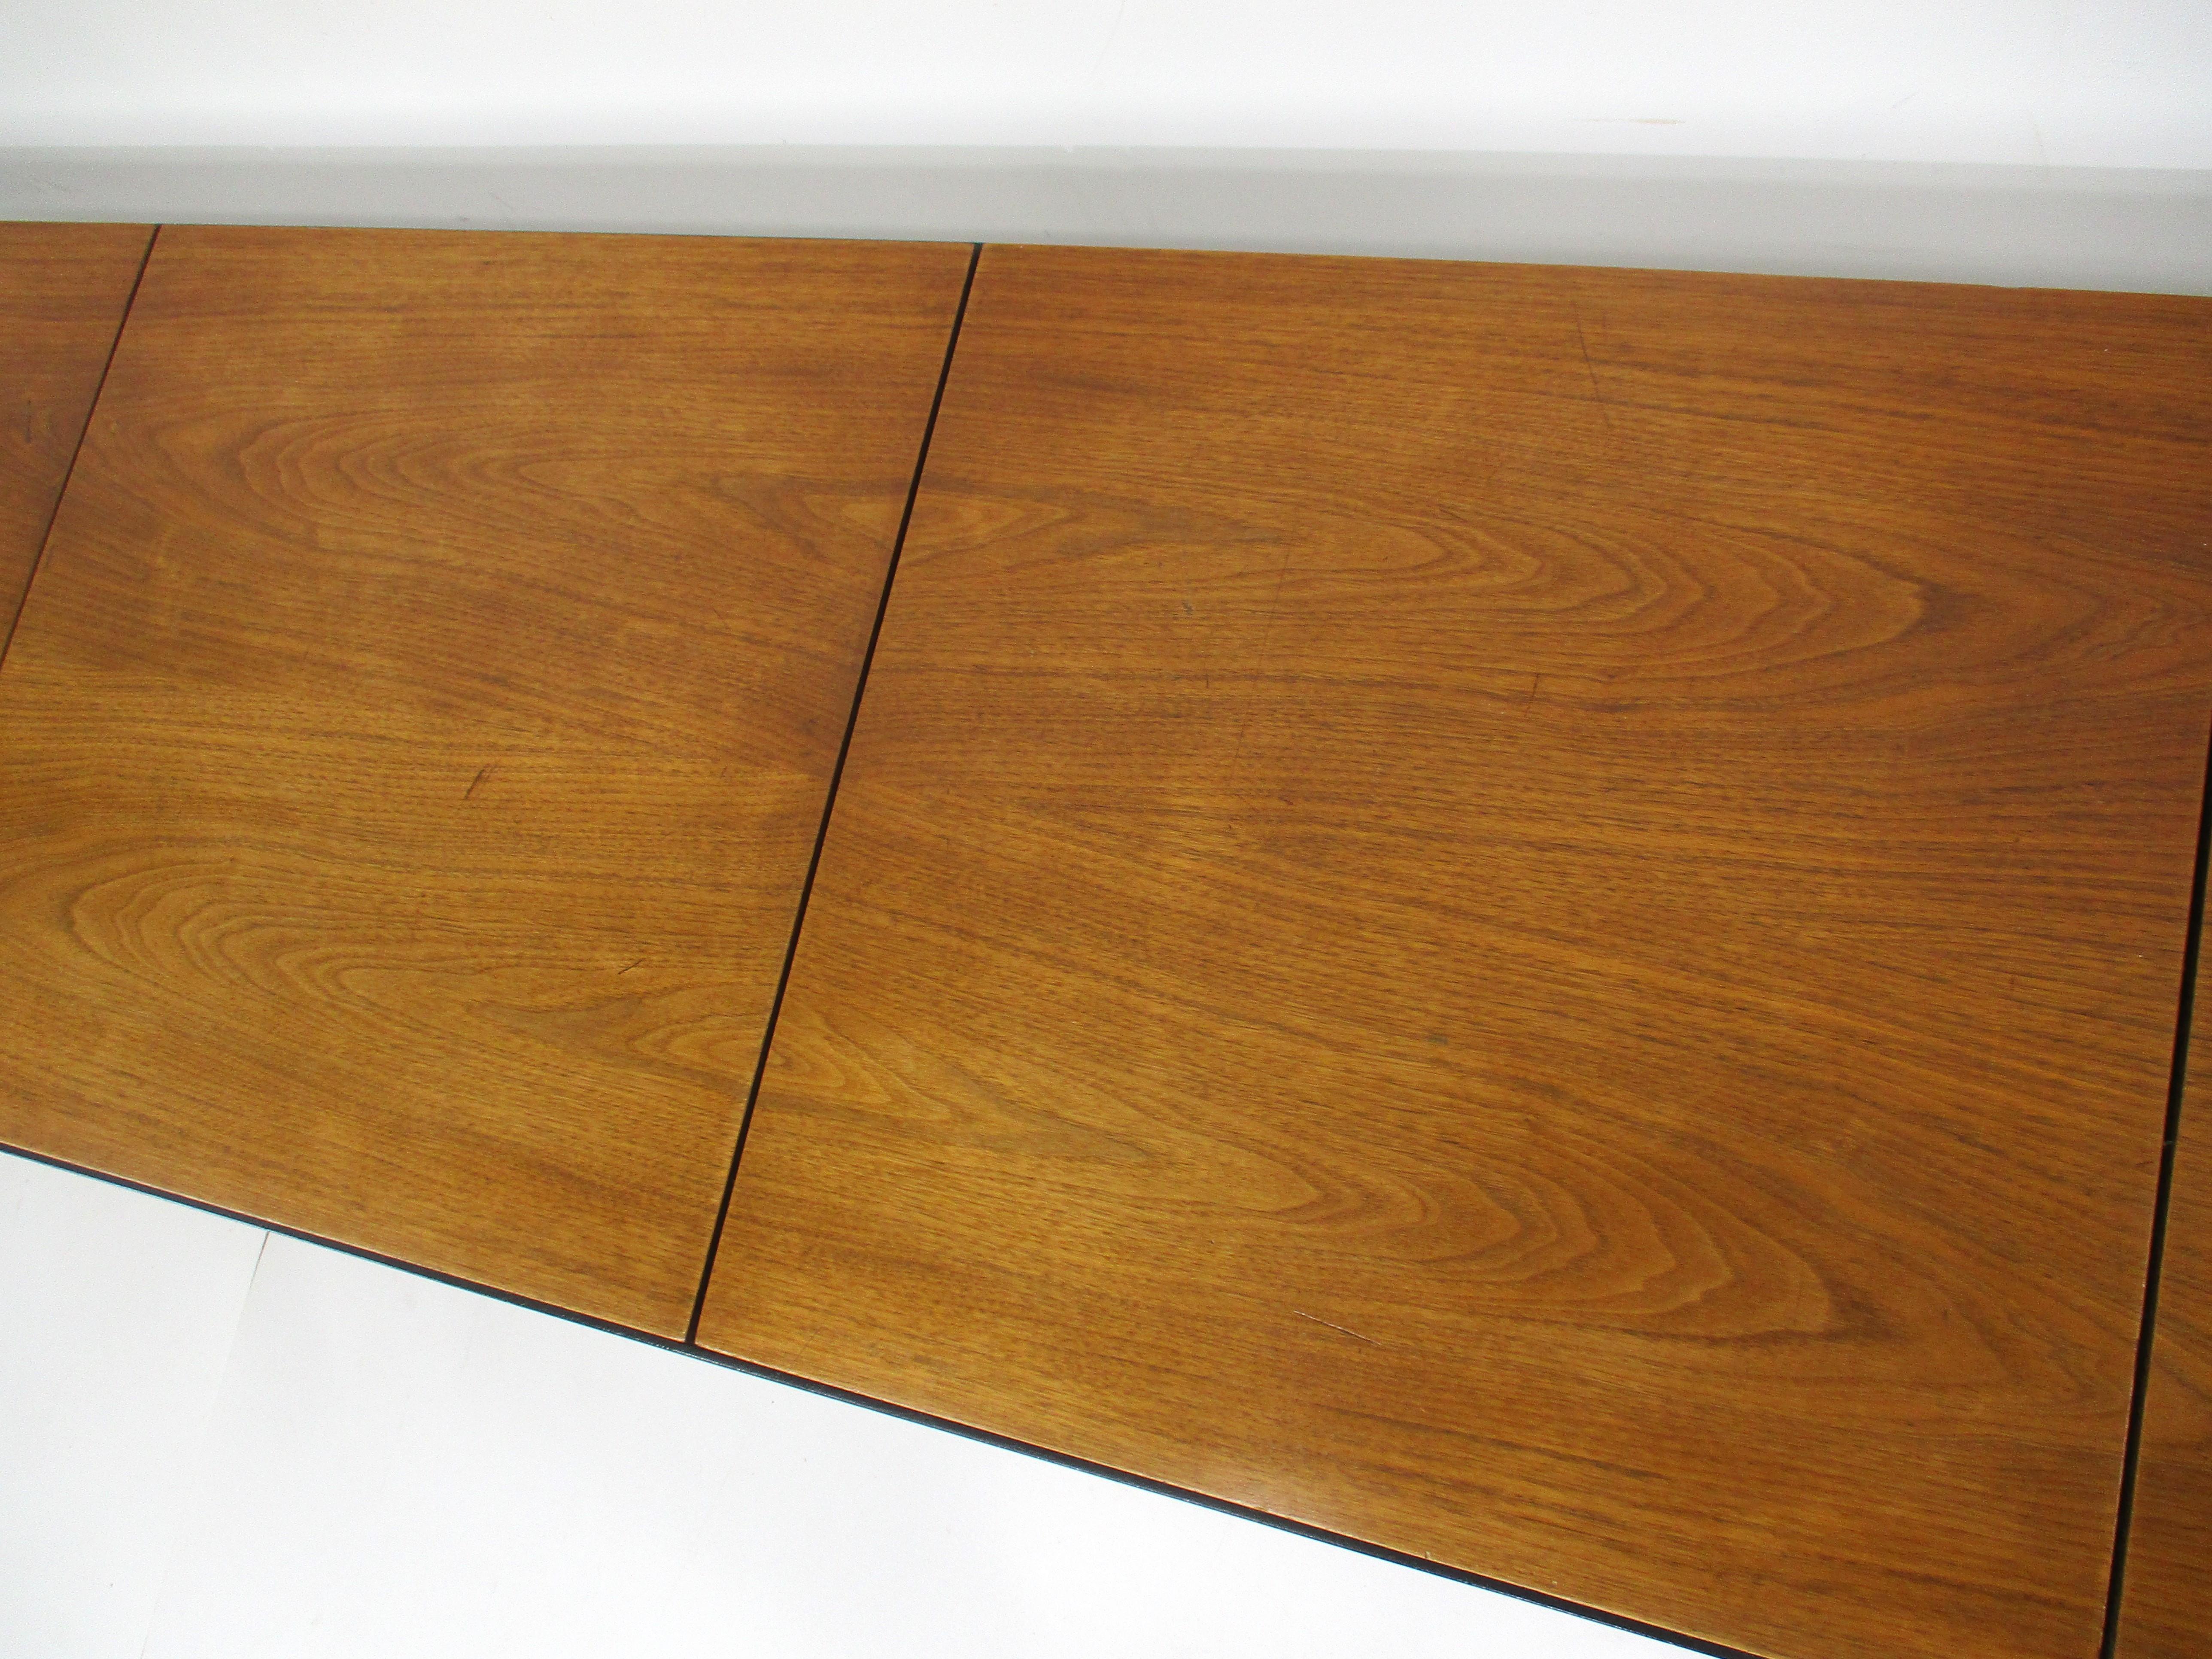 20th Century Early T Angle Walnut Coffee Table / Bench by Florence Knoll # 332 for Knoll (B)  For Sale